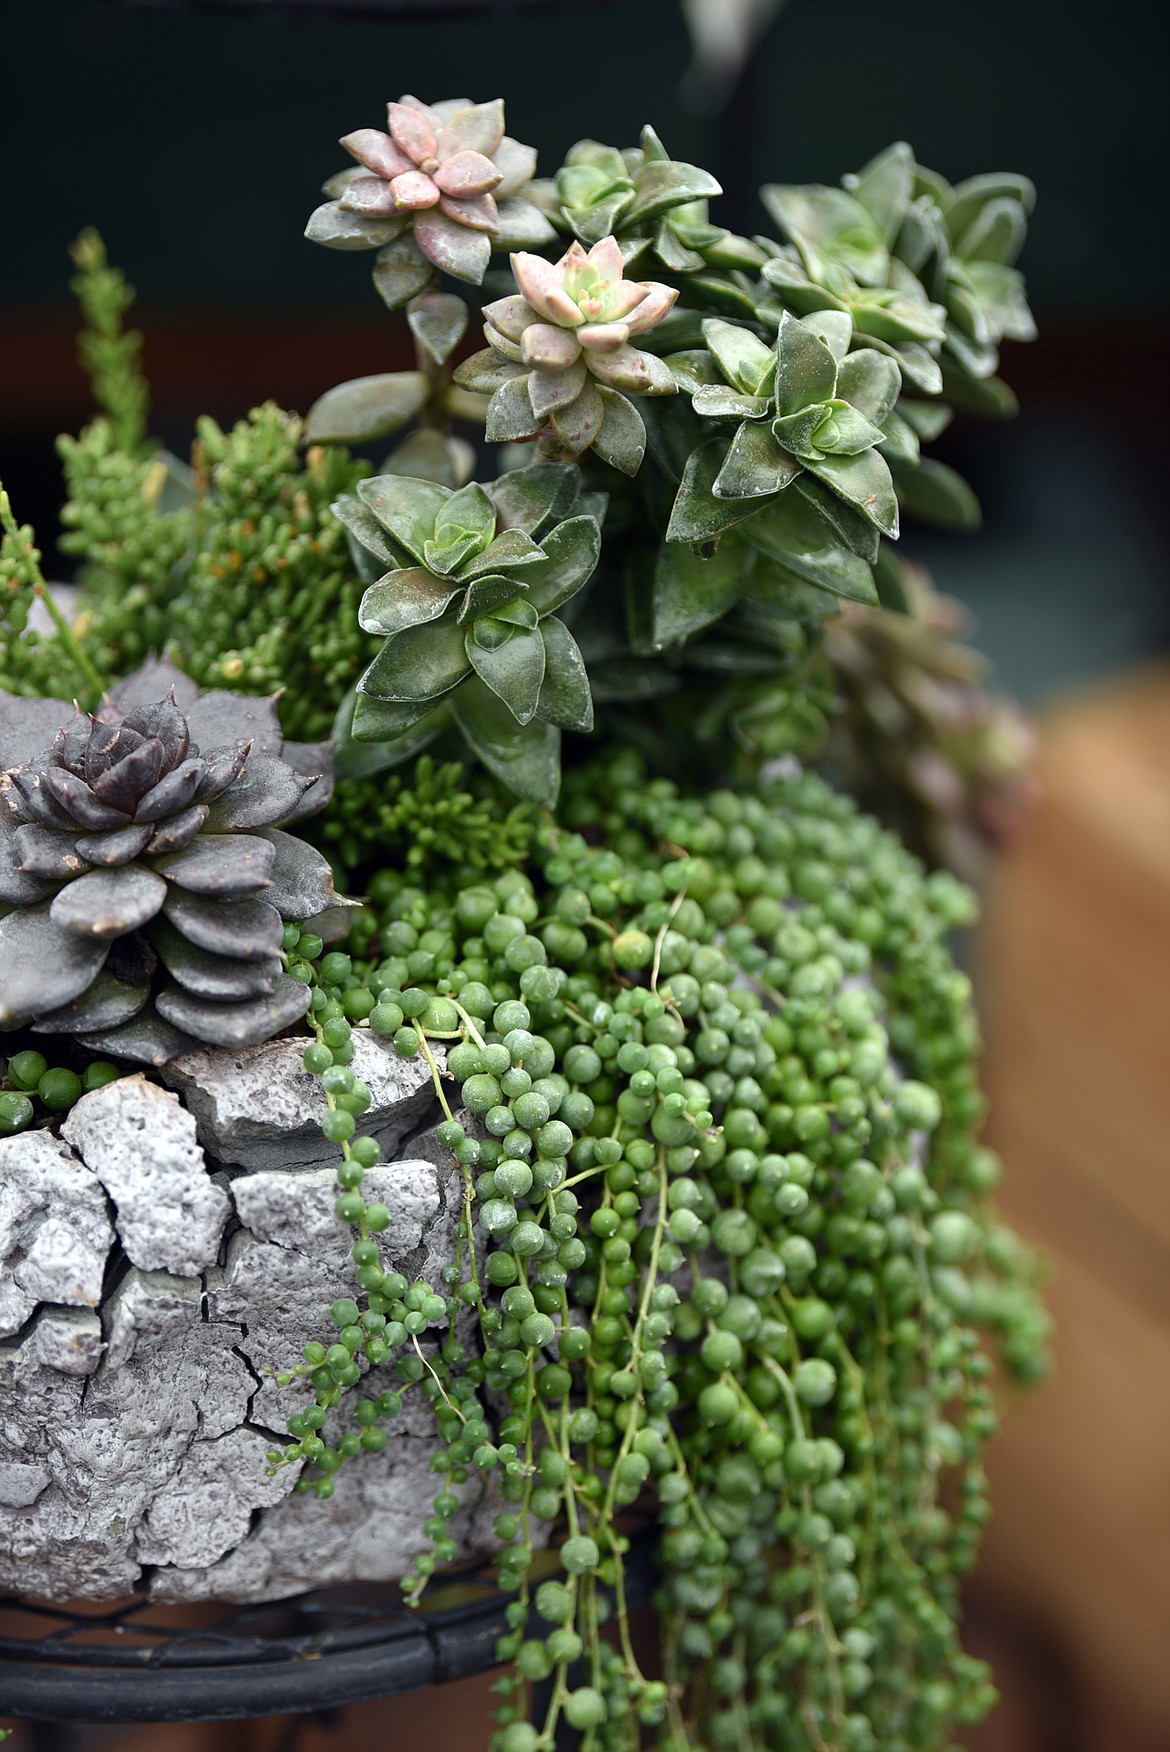 One of the types of plants not grown at Plant Land and yet very popular are their collection of succulents.(Brenda Ahearn/Daily Inter Lake)